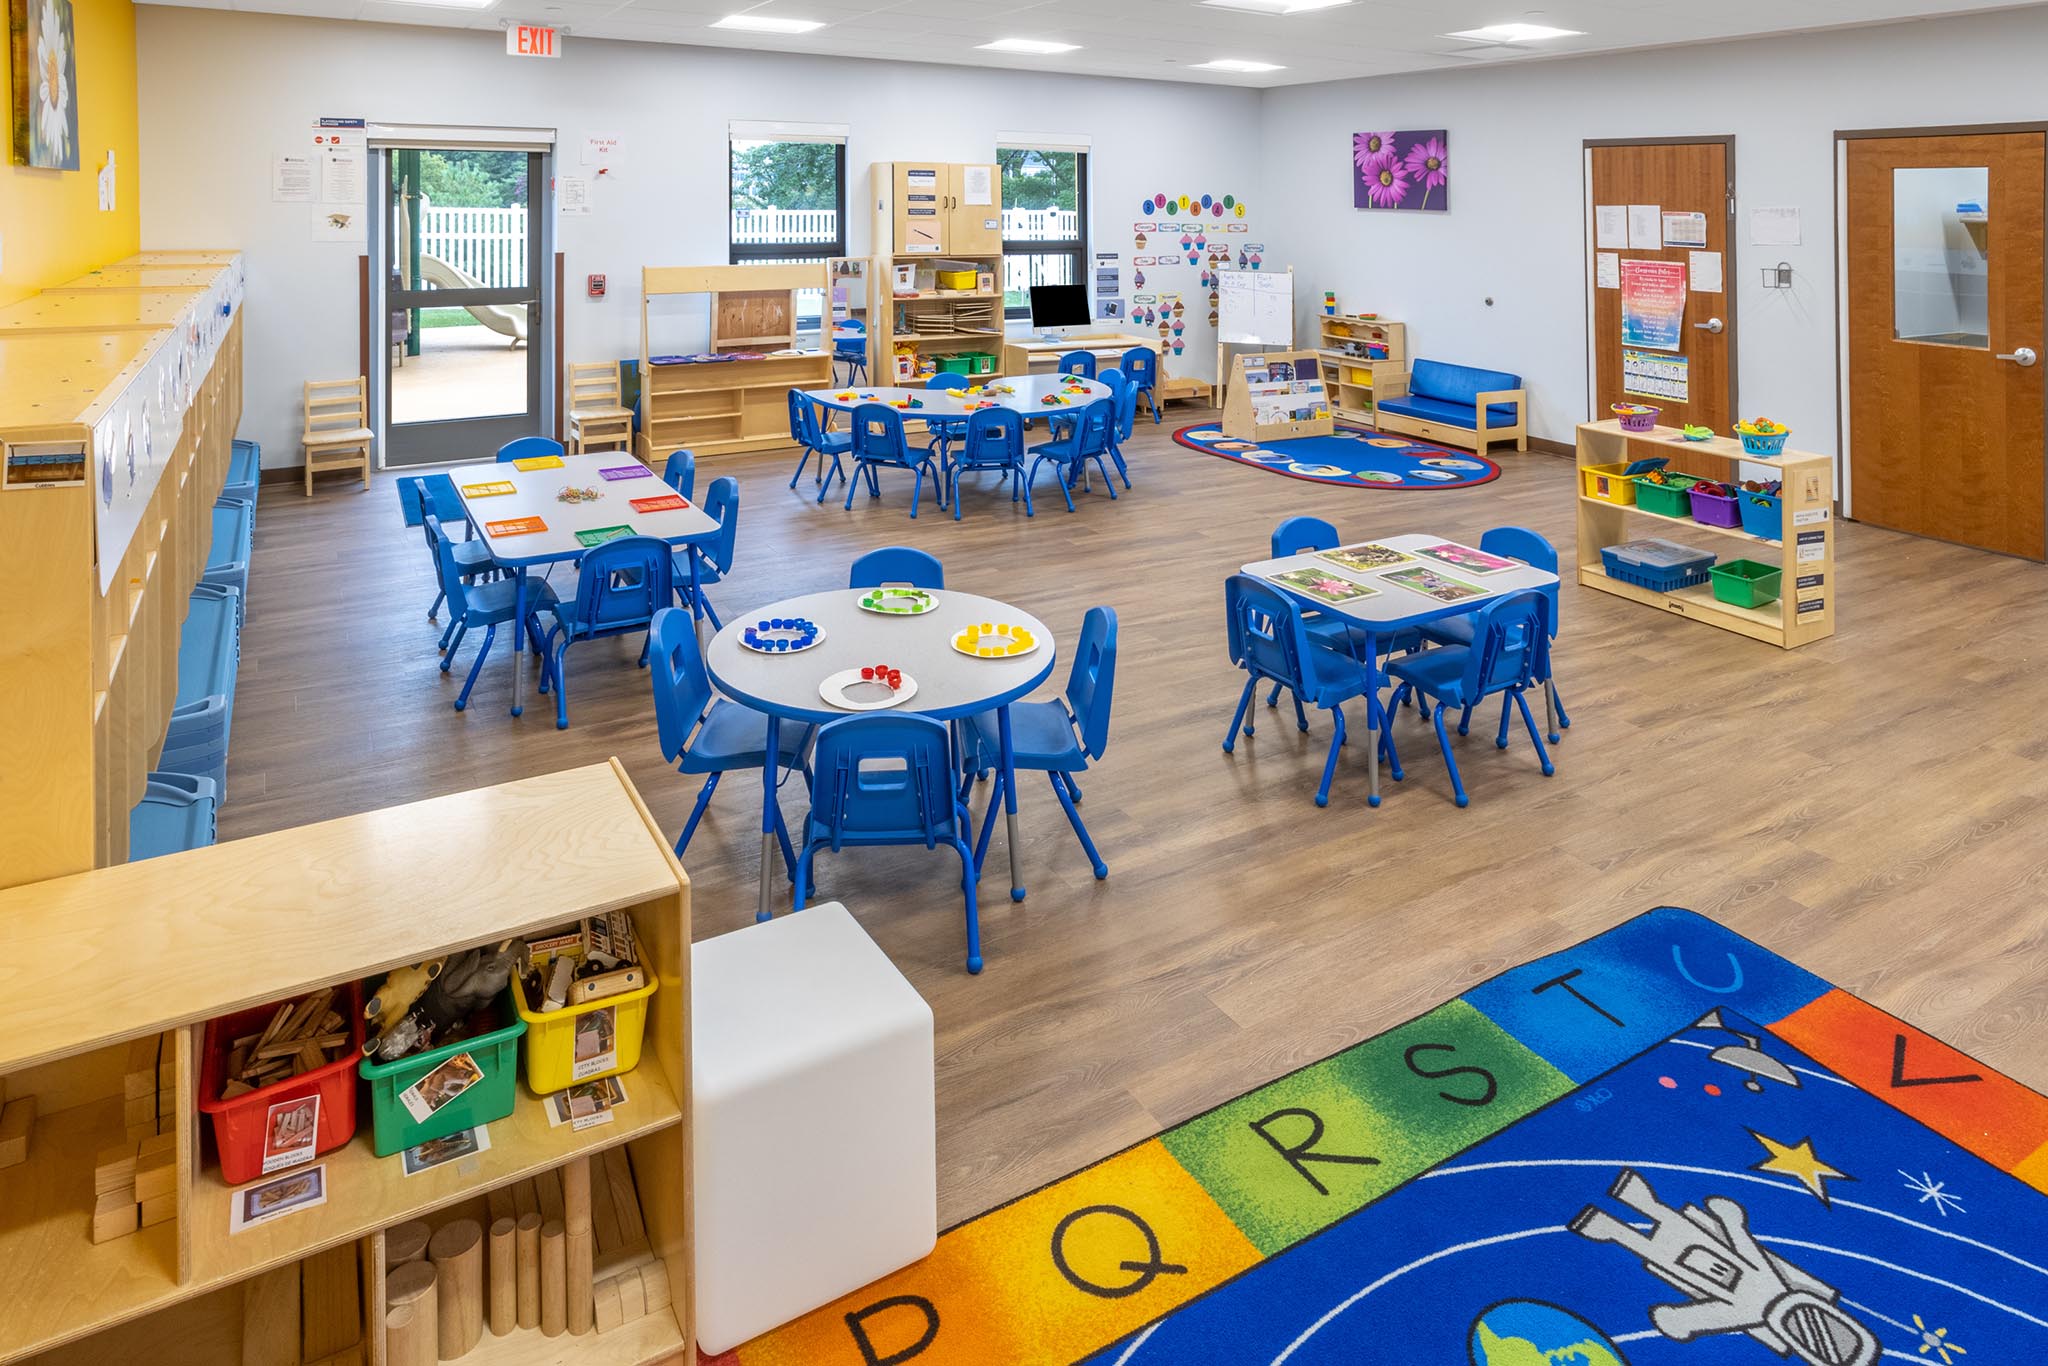 A large Goddard School classroom with a half moon blue table and blue chairs. A green, blue and brown alphabet rug is on the floor near shelves with baskets for storage. 